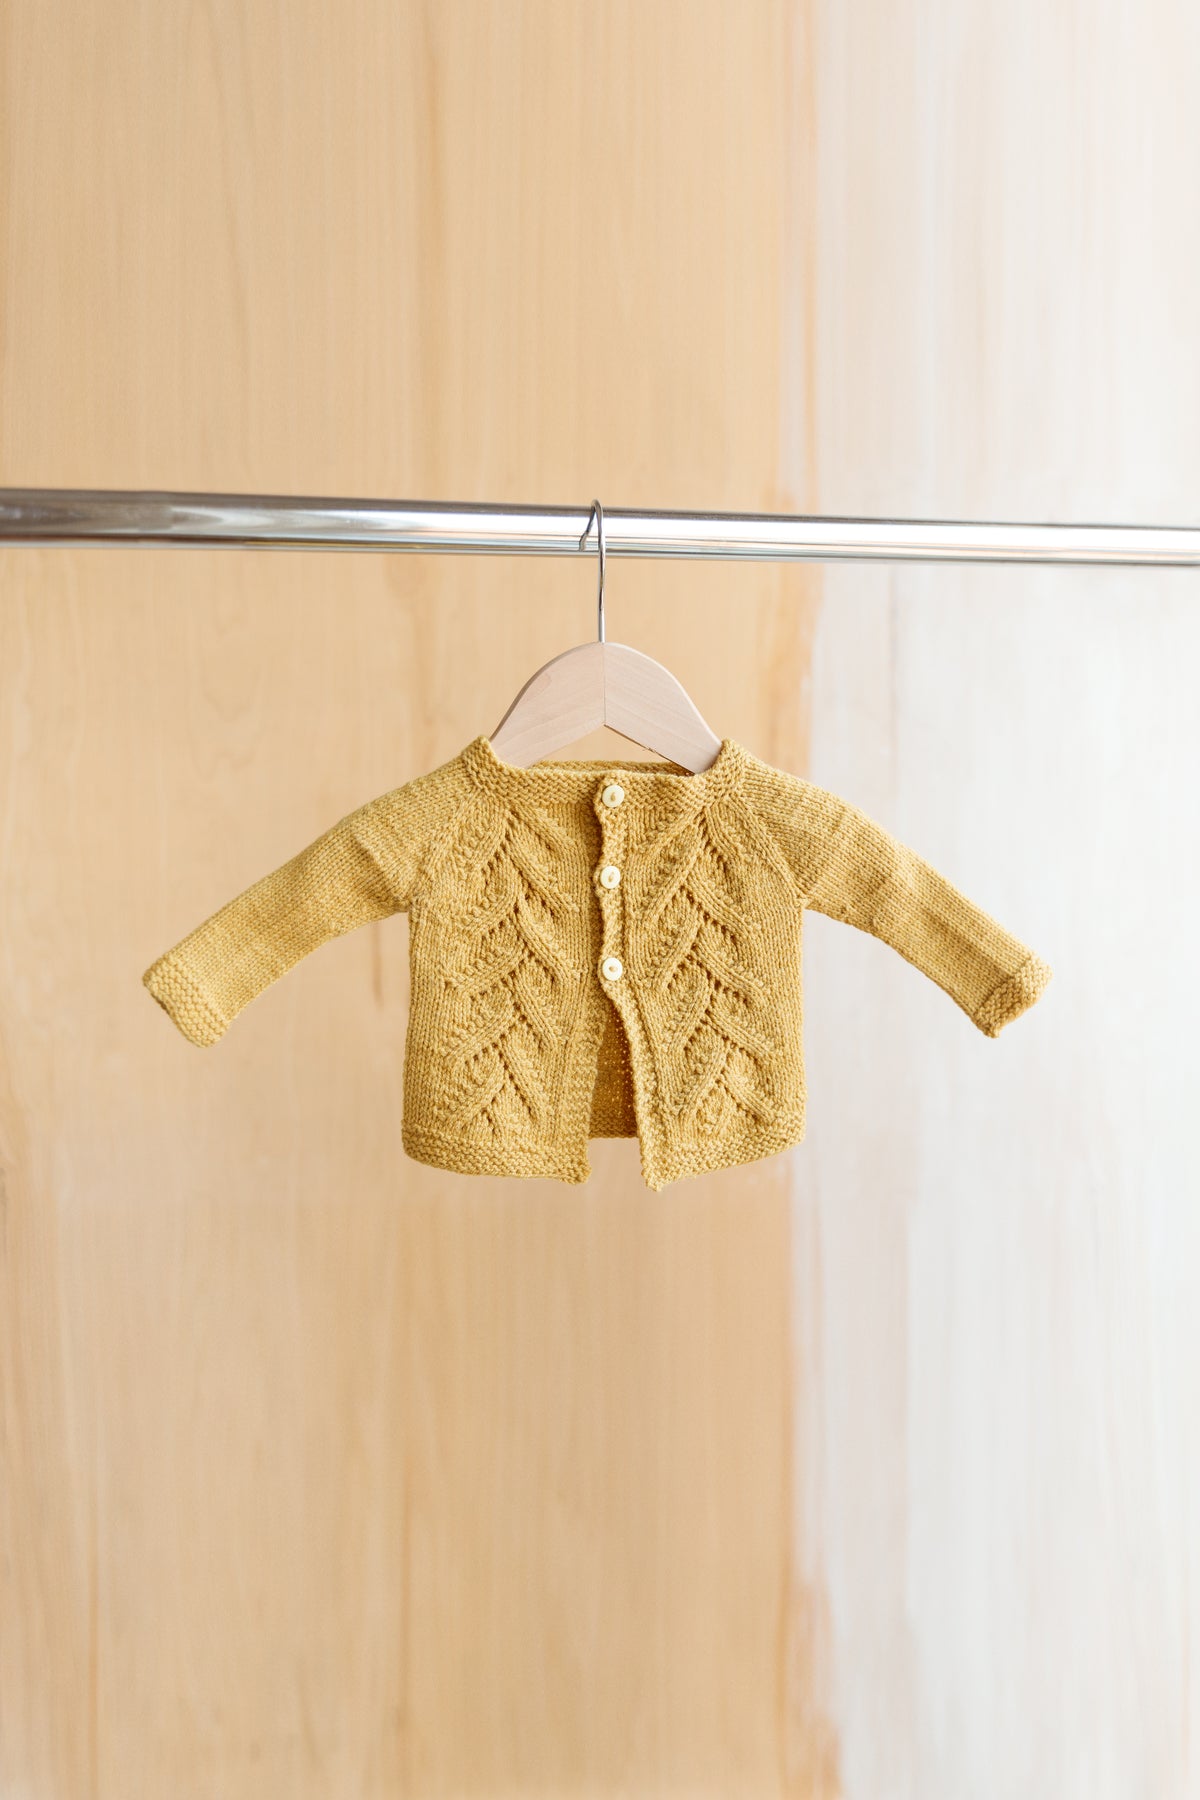 Eco+ USA Made Knit Apparel - Adult/Kids/Infant and Accessories.